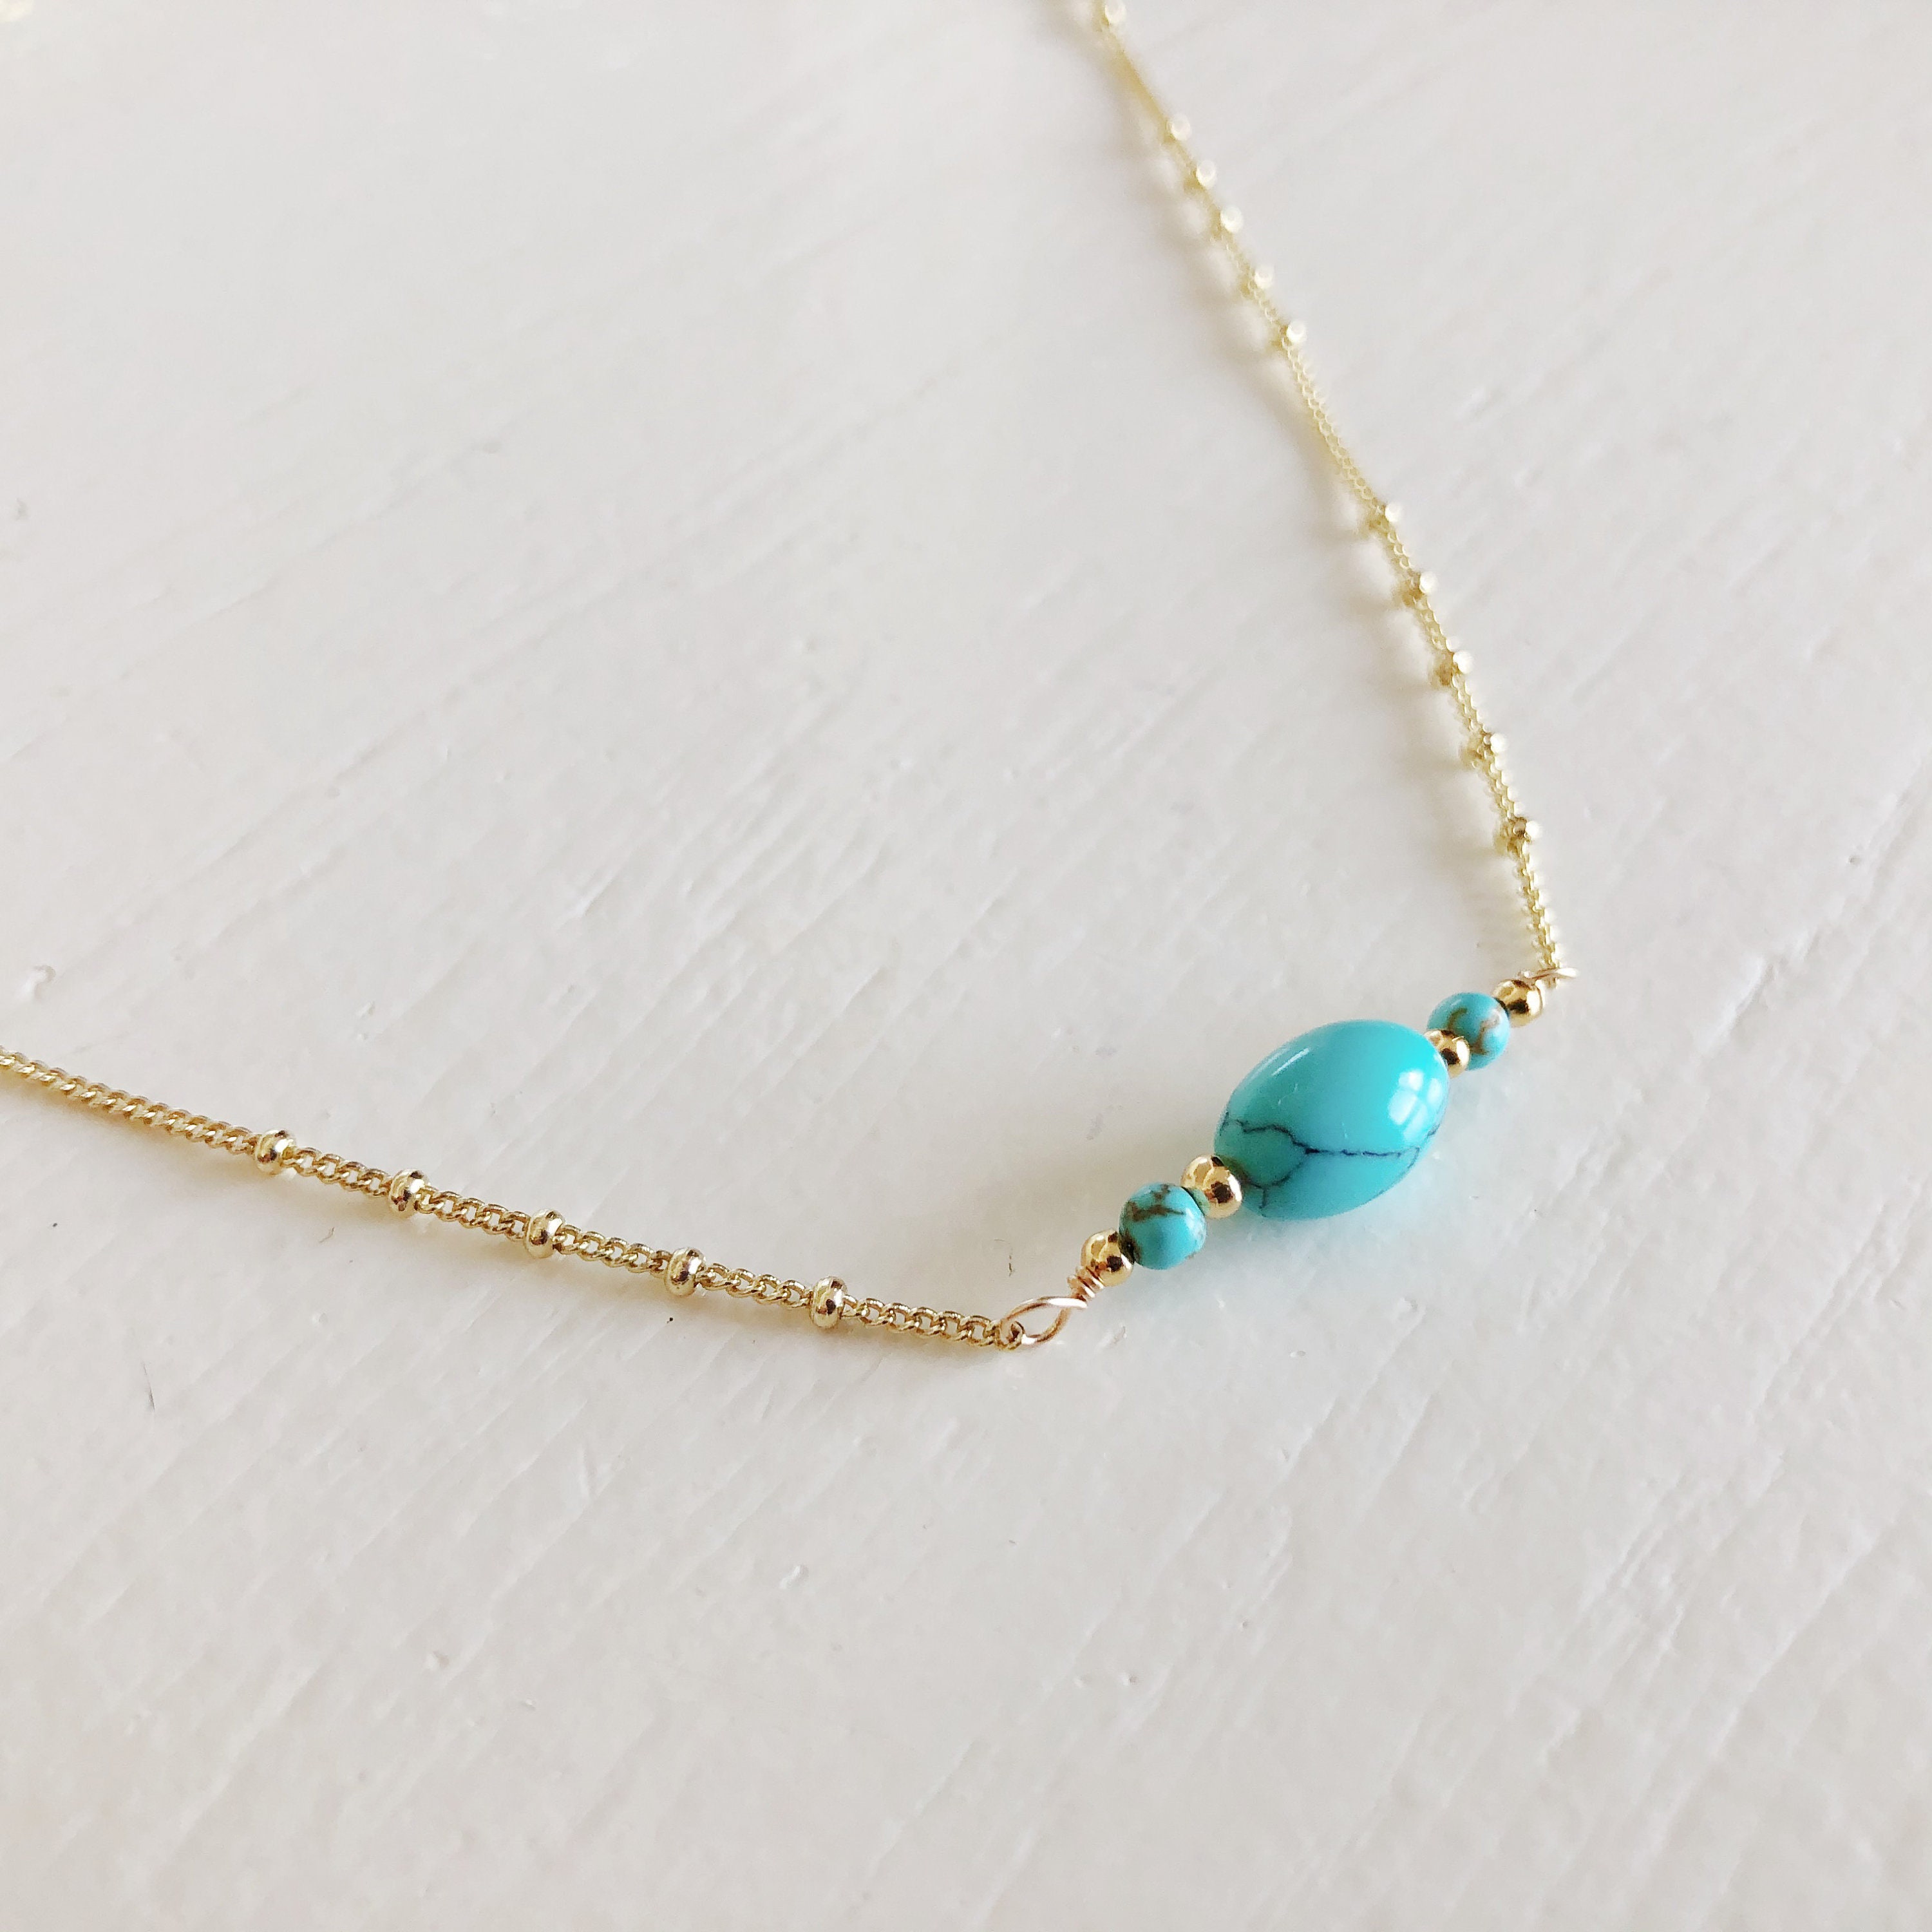 14K Gold Filled satellite necklace with pearls or Turquoise | Etsy